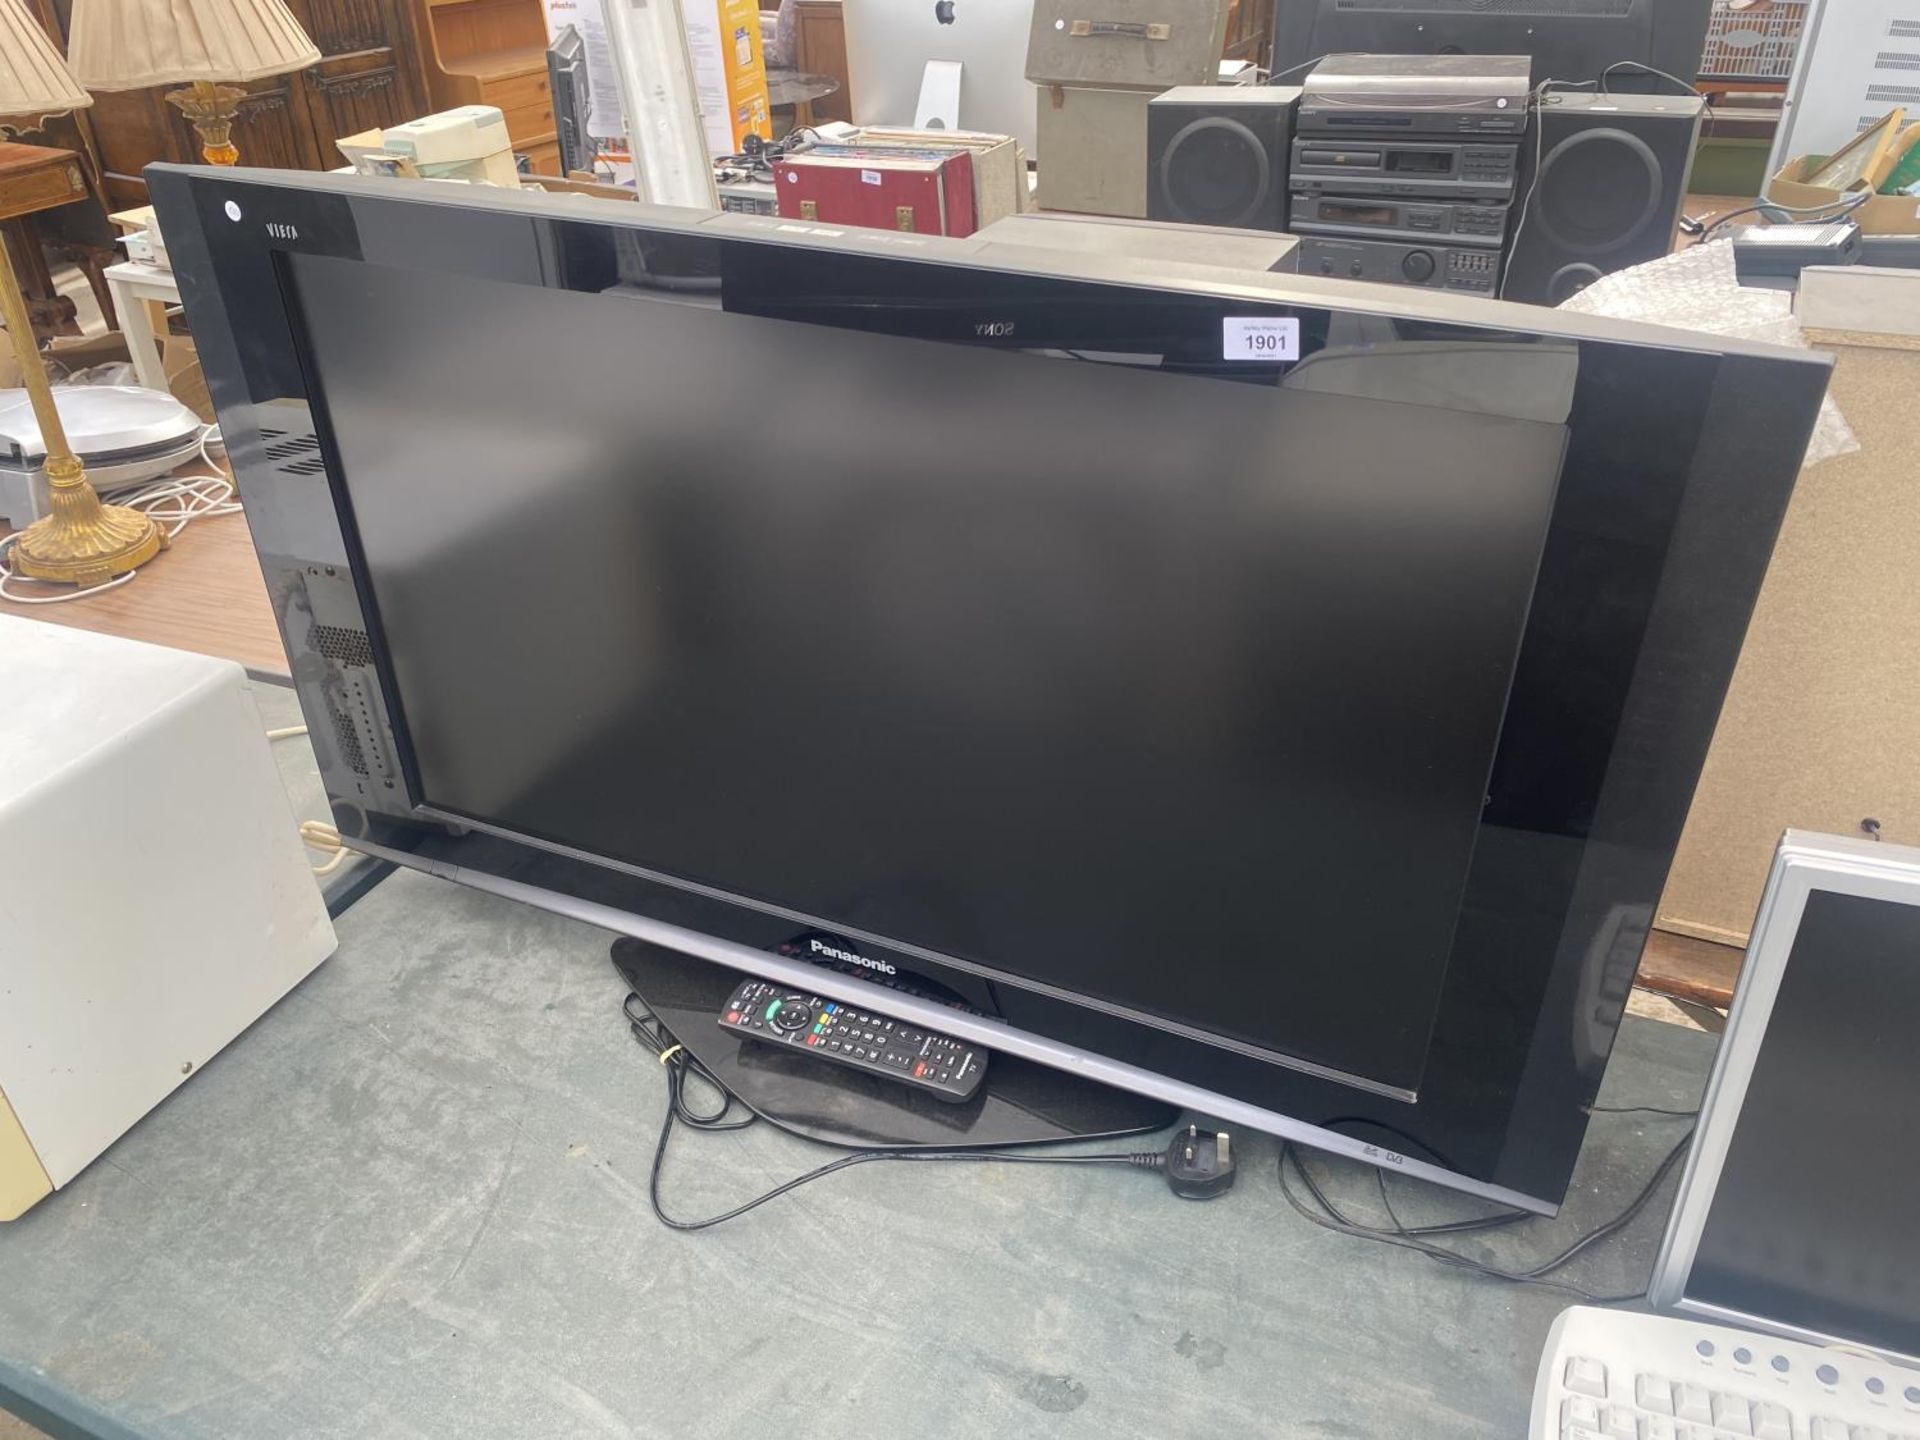 A 37" PANASONIC TELEVISION WITH REMOTE CONTROL BELIEVED IN WORKING ORDER BUT NO WARRANTY